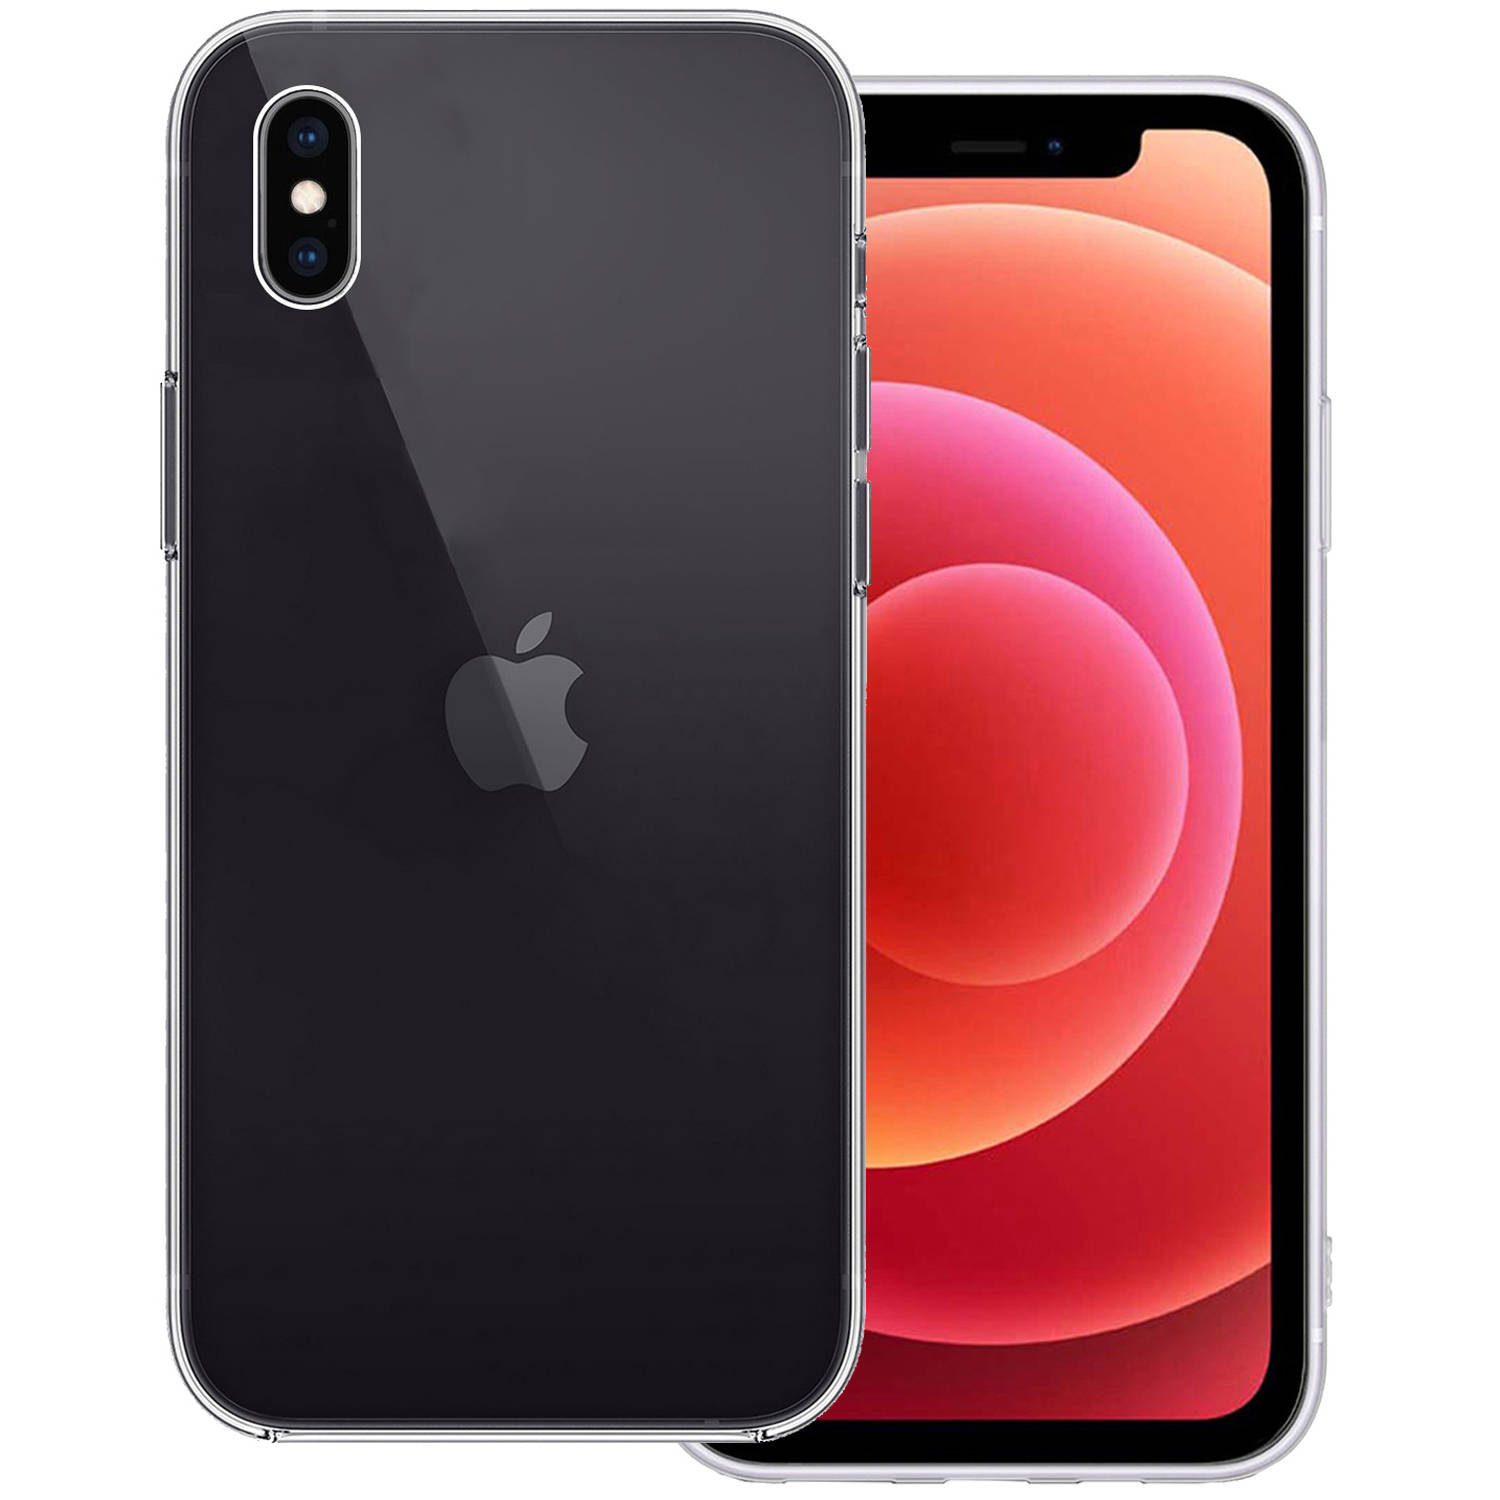 Basey iPhone Xs Max Hoesje Siliconen Hoes Case Cover iPhone Xs Max-Transparant